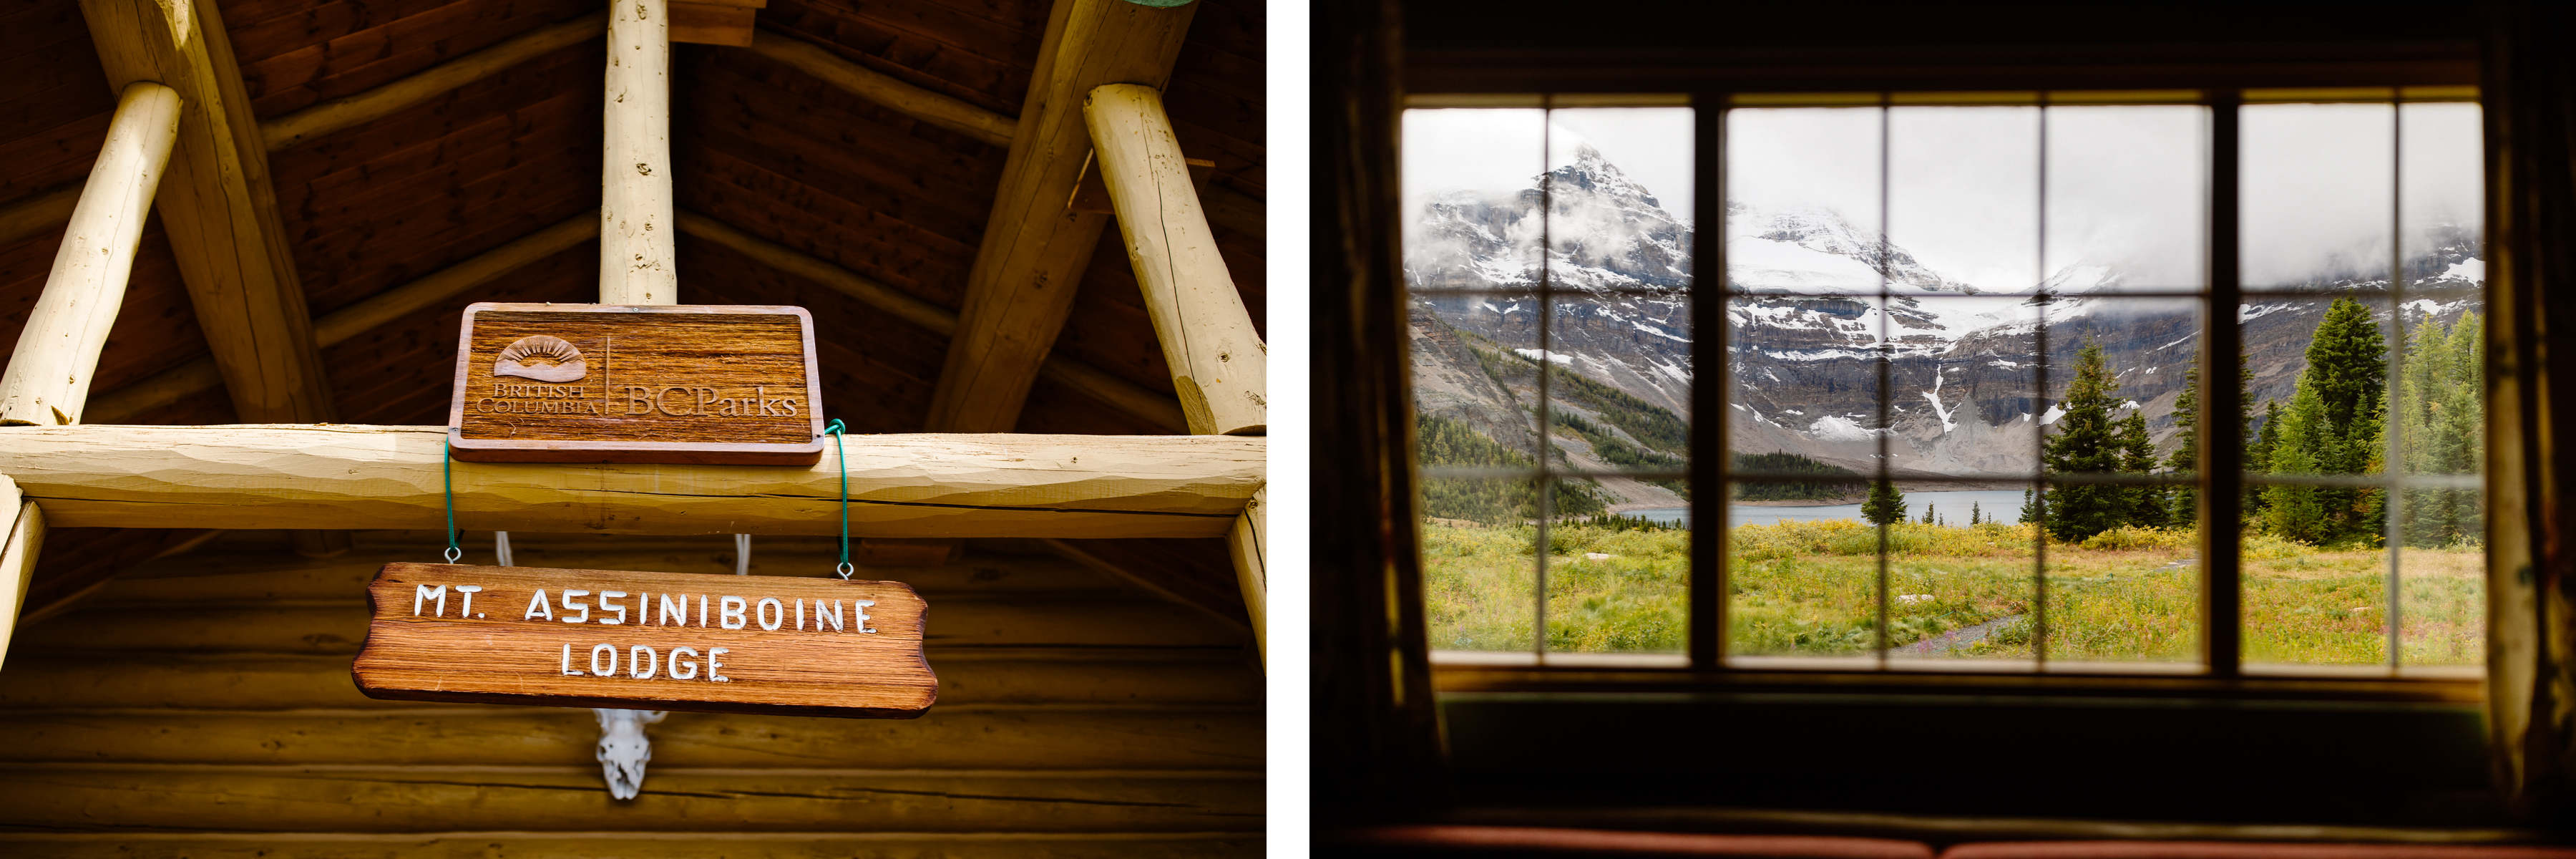 Mount Assiniboine Elopement Photographers at a Backcountry Lodge - Photo 7